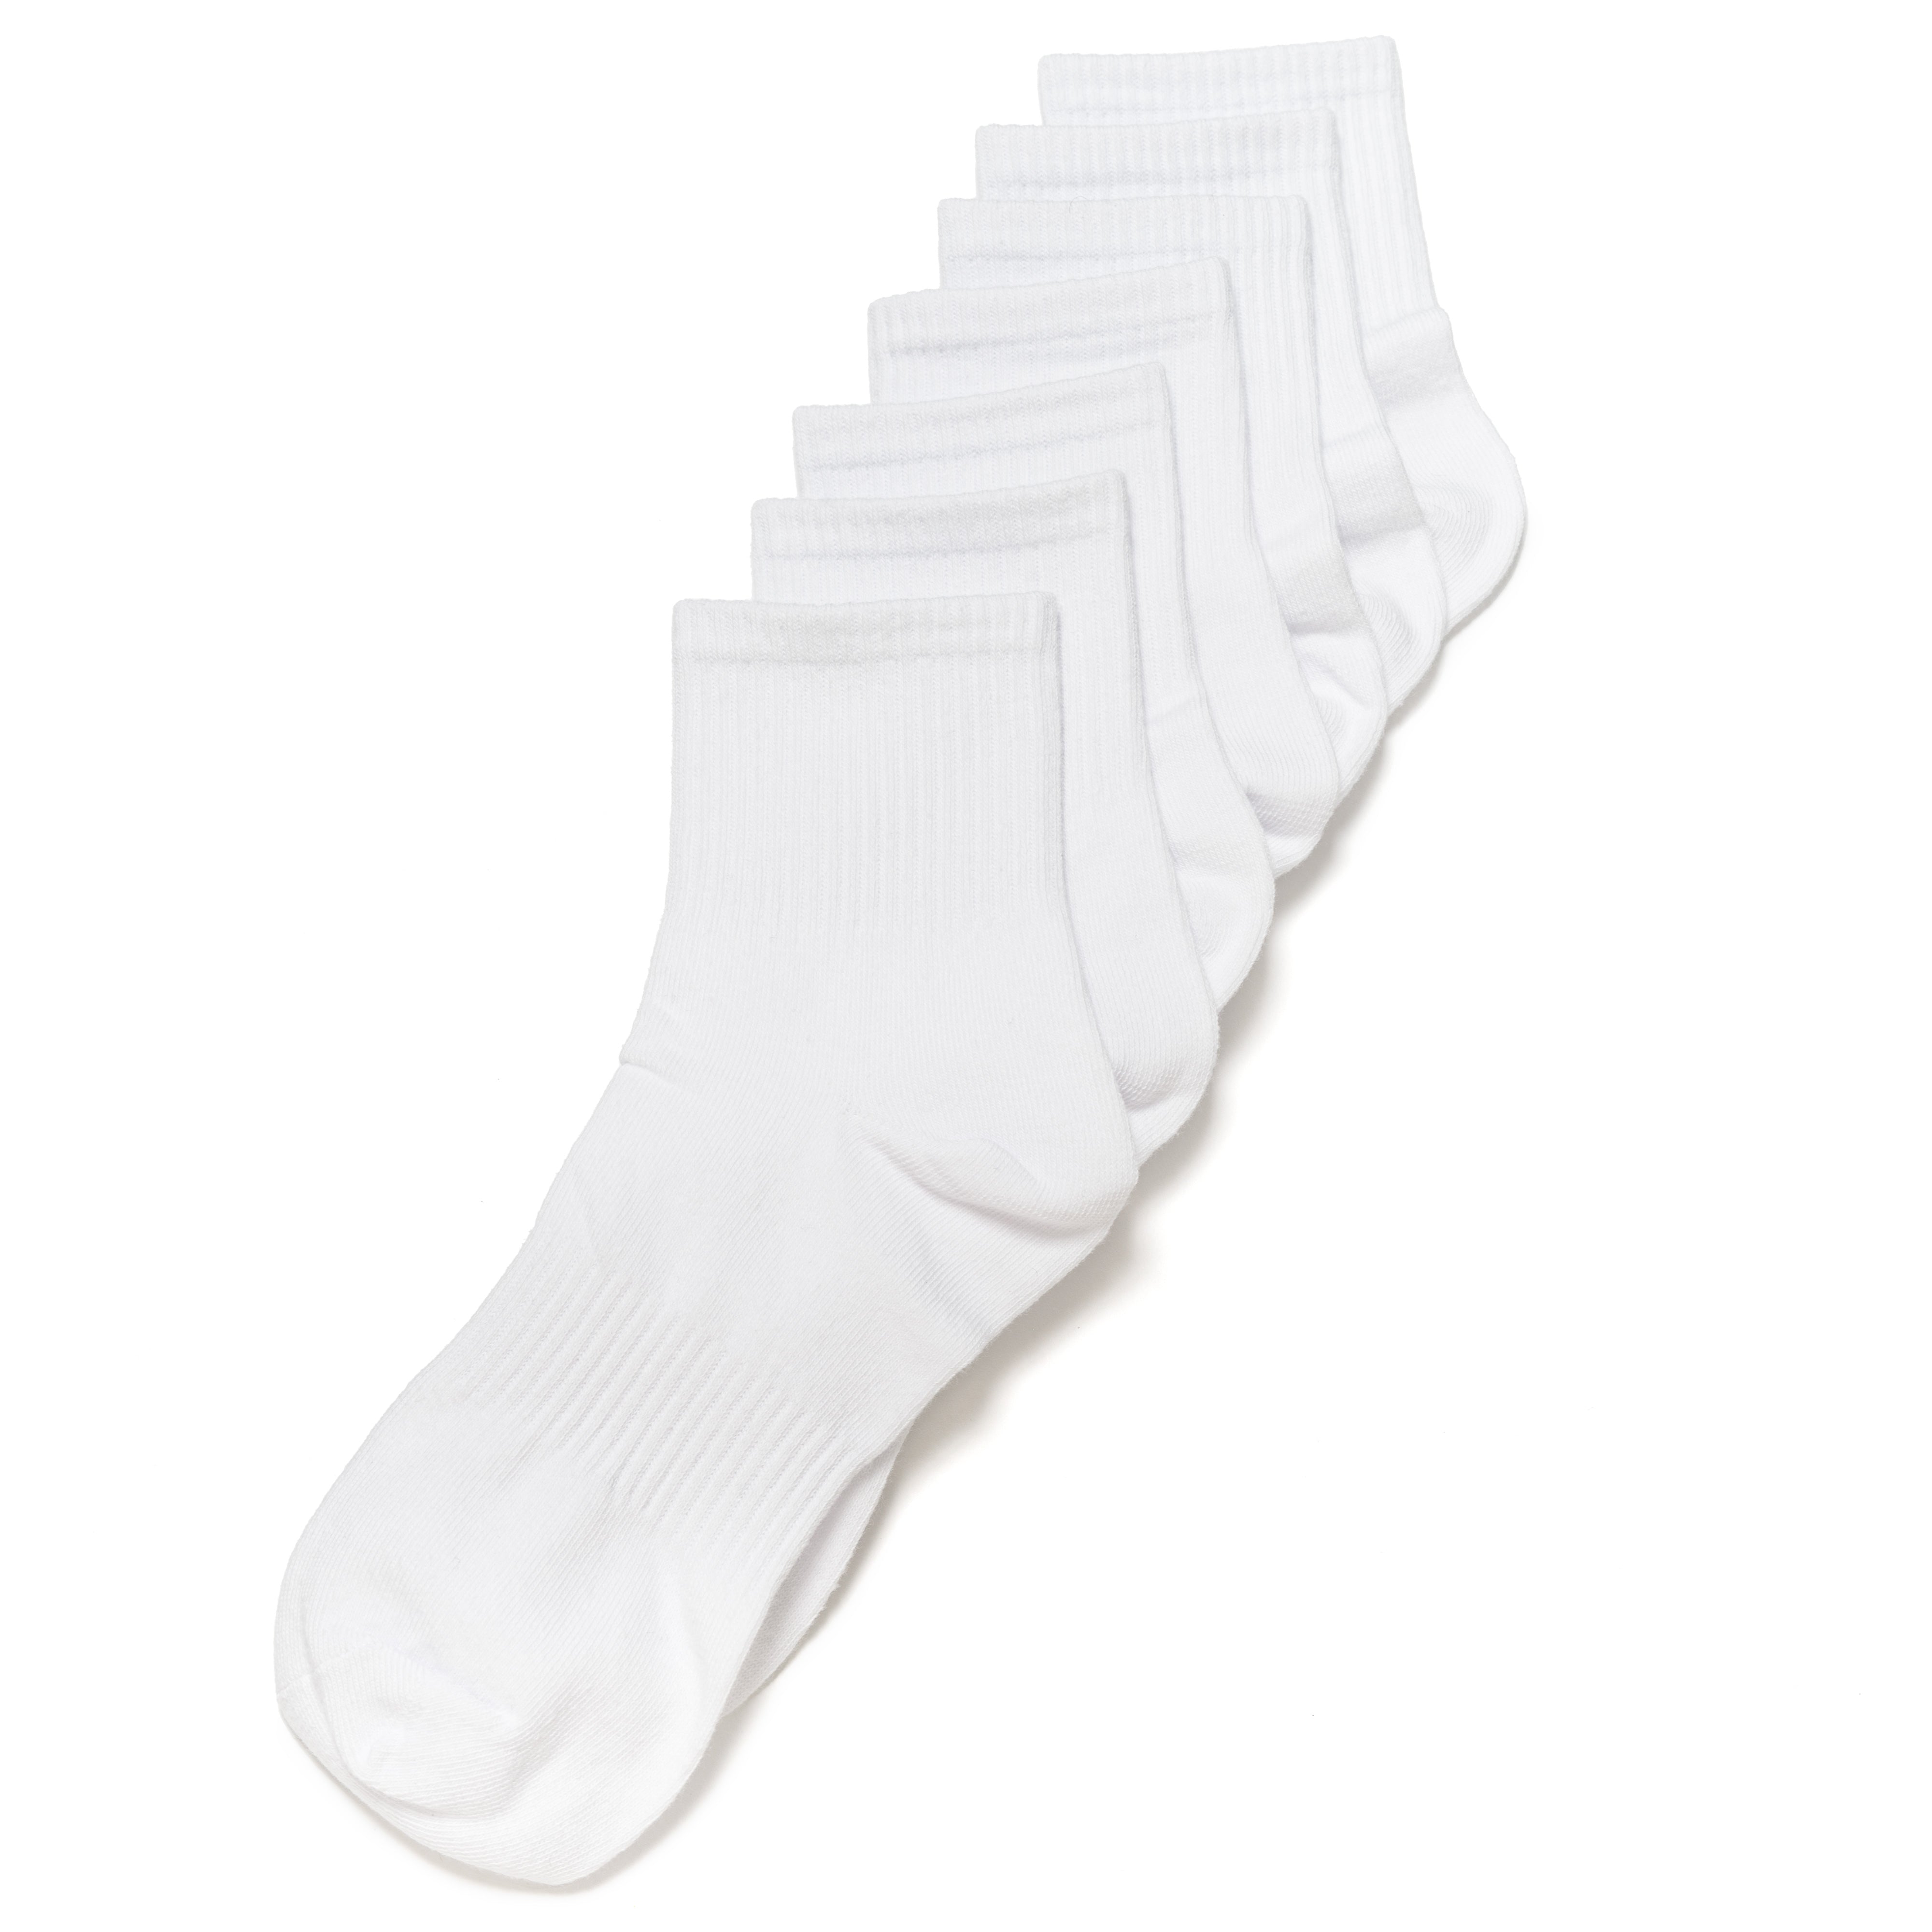 31 Pairs of High Cotton Mid Ankle Men's Socks With Anti-Fungal Powder - New Socks Daily